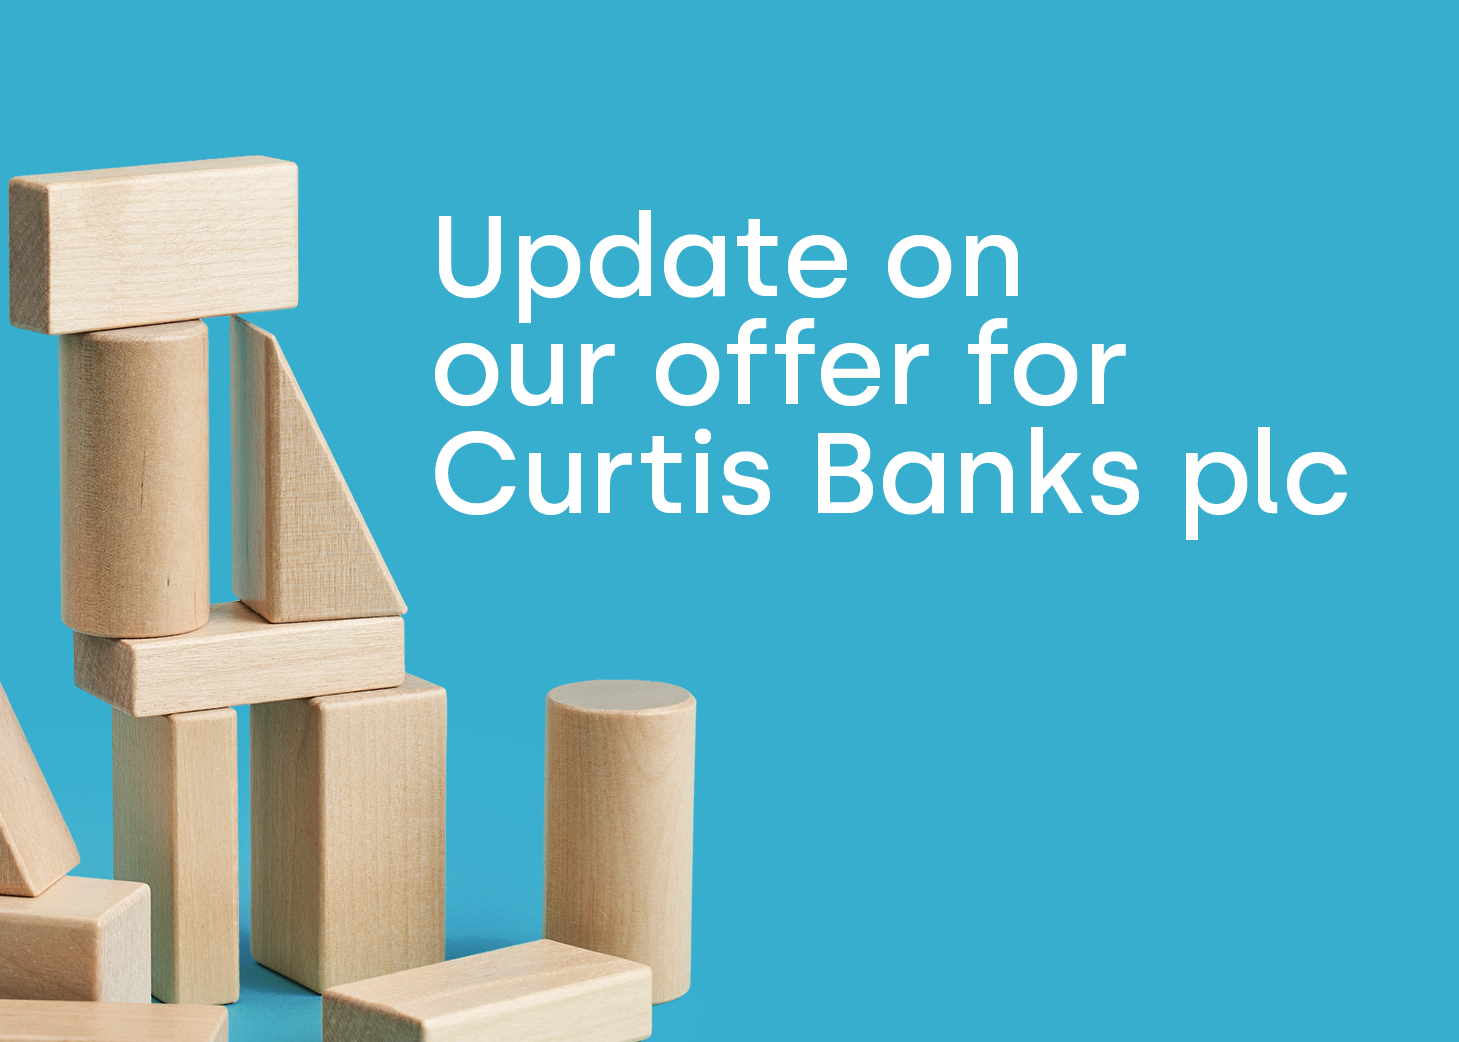 Nucleus group welcomes shareholder approval for the acquisition of Curtis Banks Group PLC